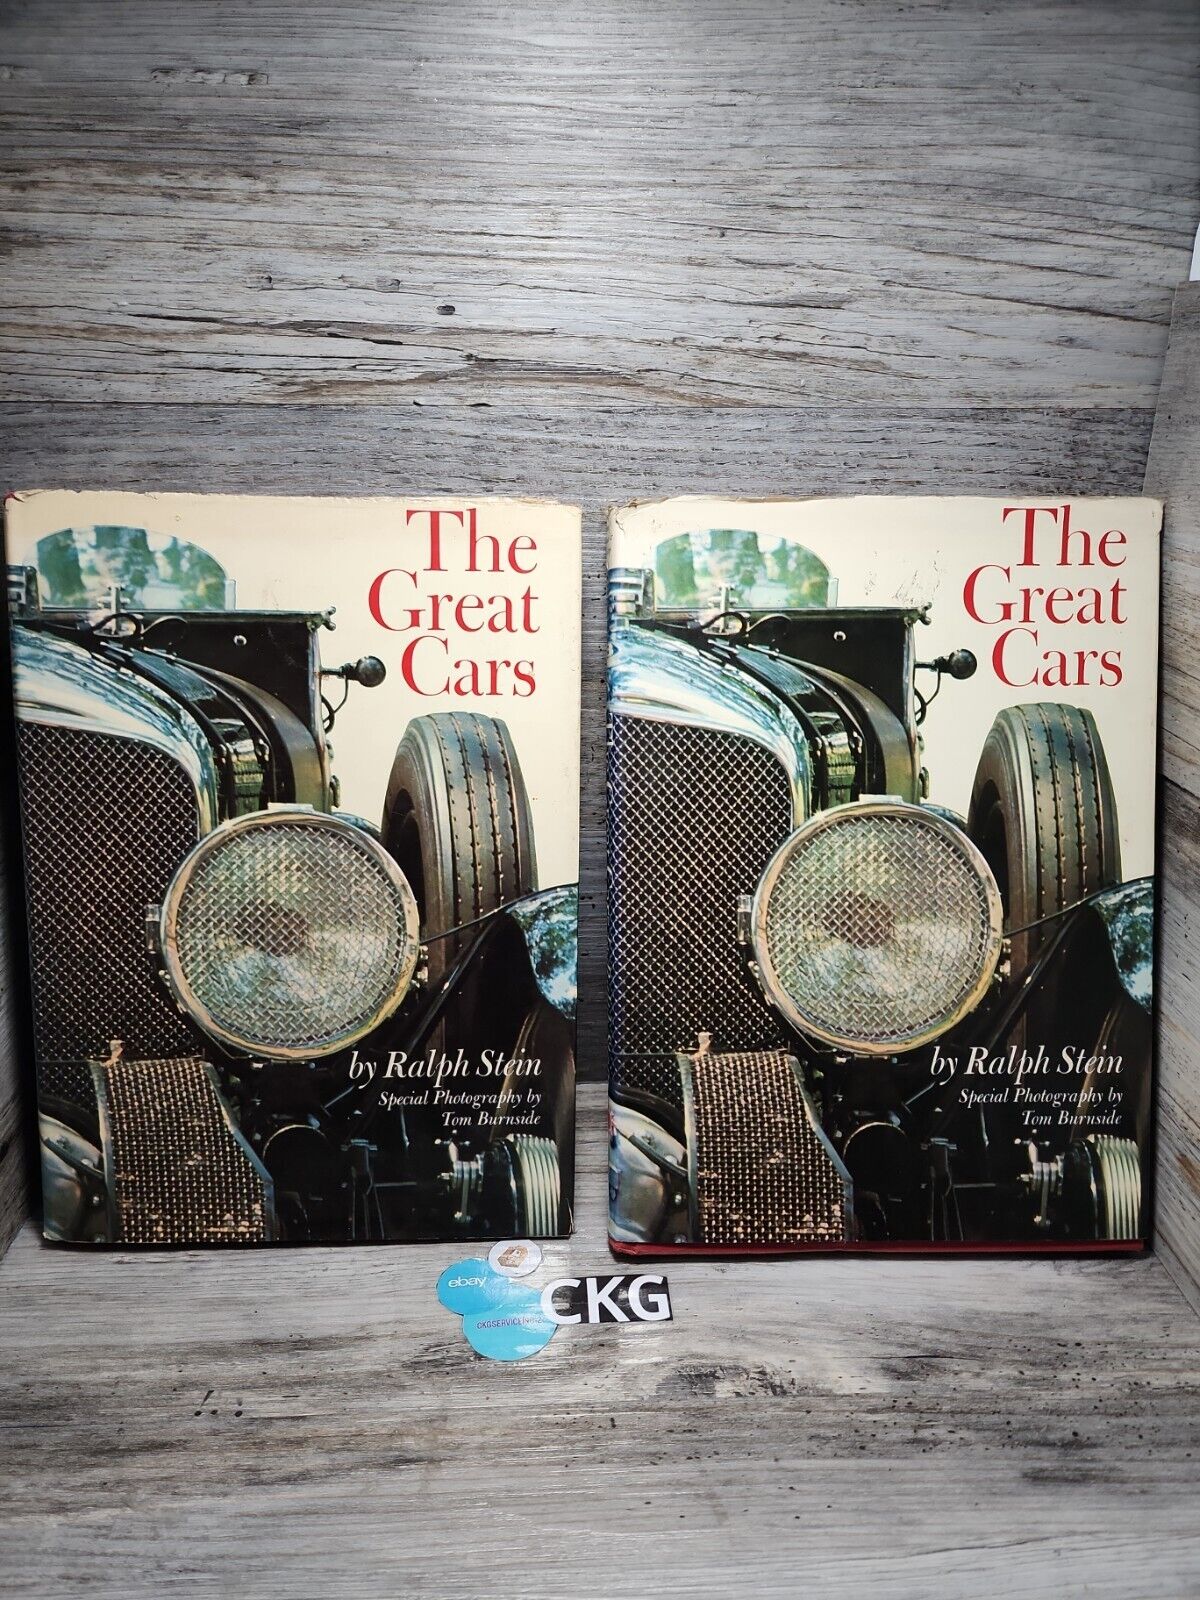 Lot of 2 .1967 The Great Cars by Ralph Stein HCDJ 1st Print Color Illus 